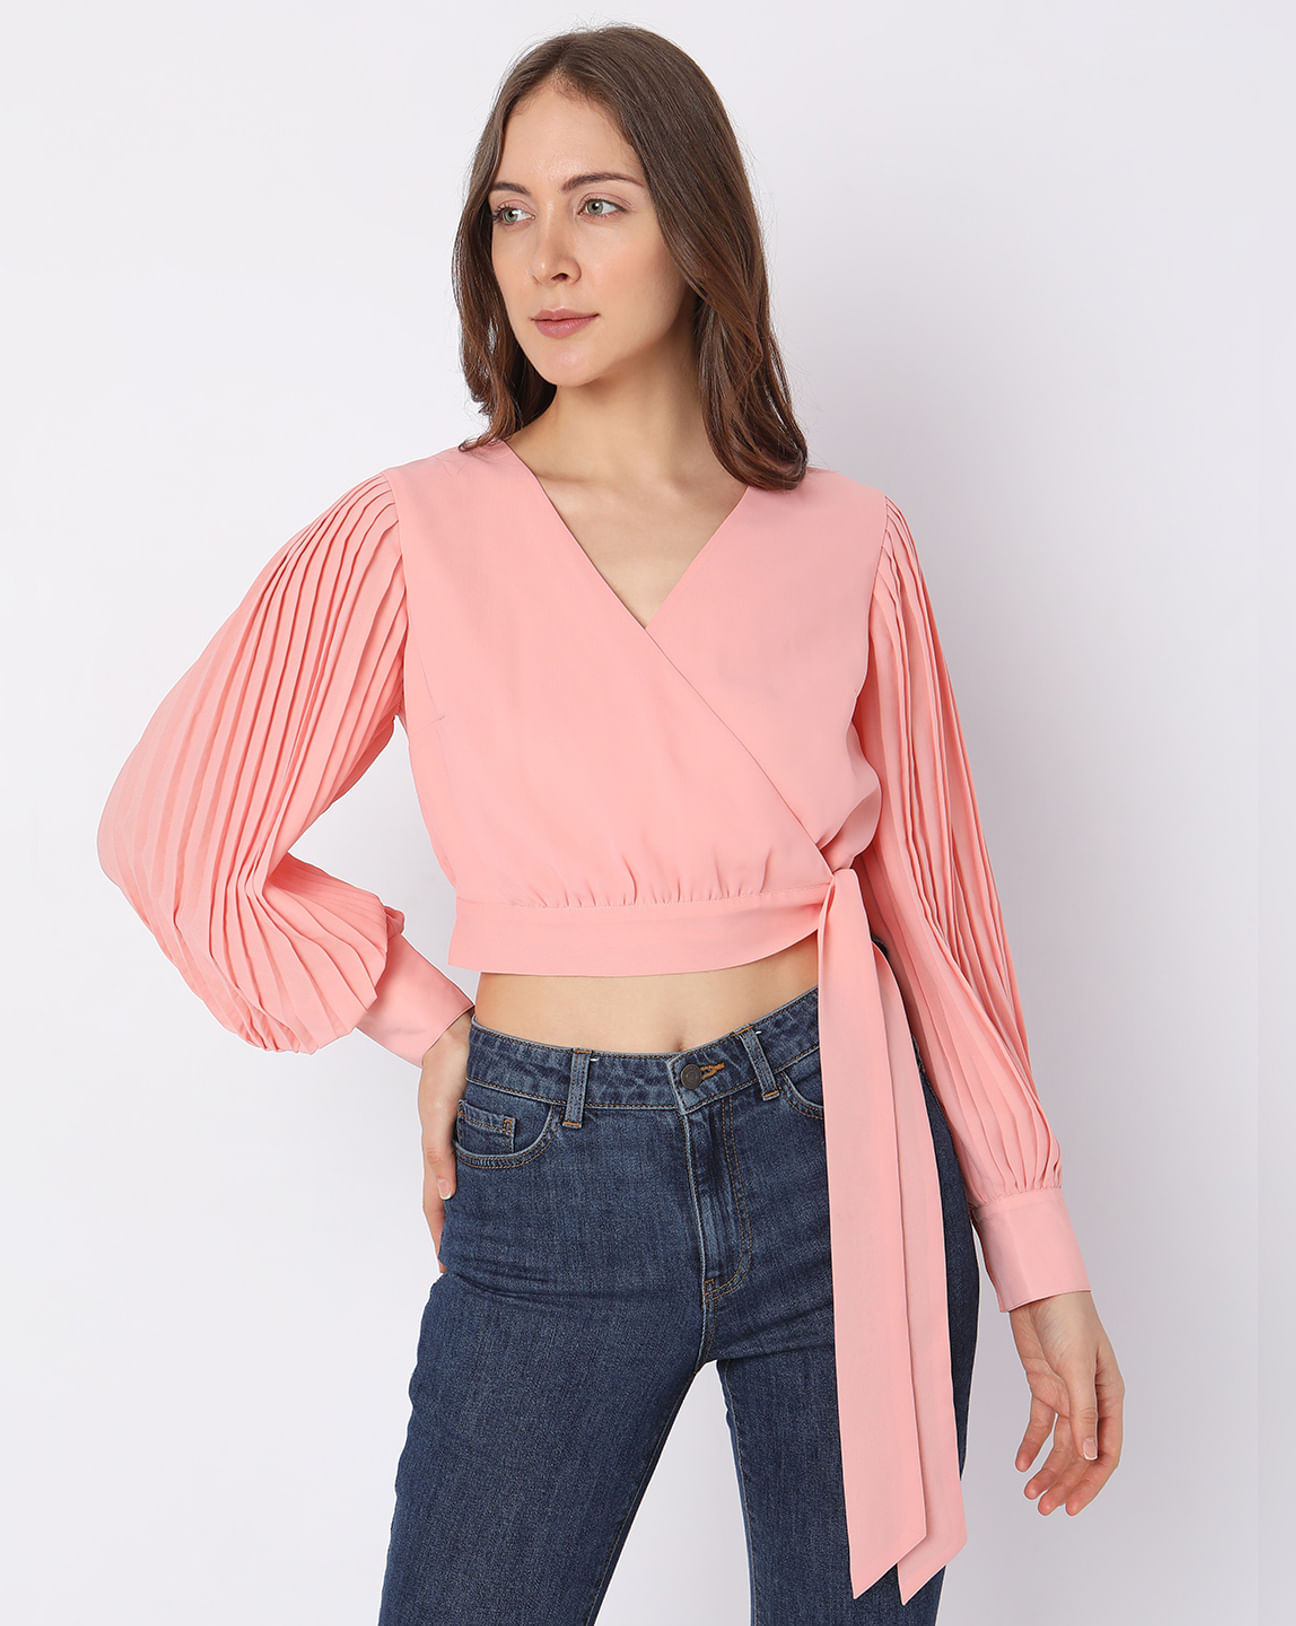 Tender Touch Blush Pink Long Sleeve Crop Top  Pink long sleeve crop top, Long  sleeve crop top, Crop tops